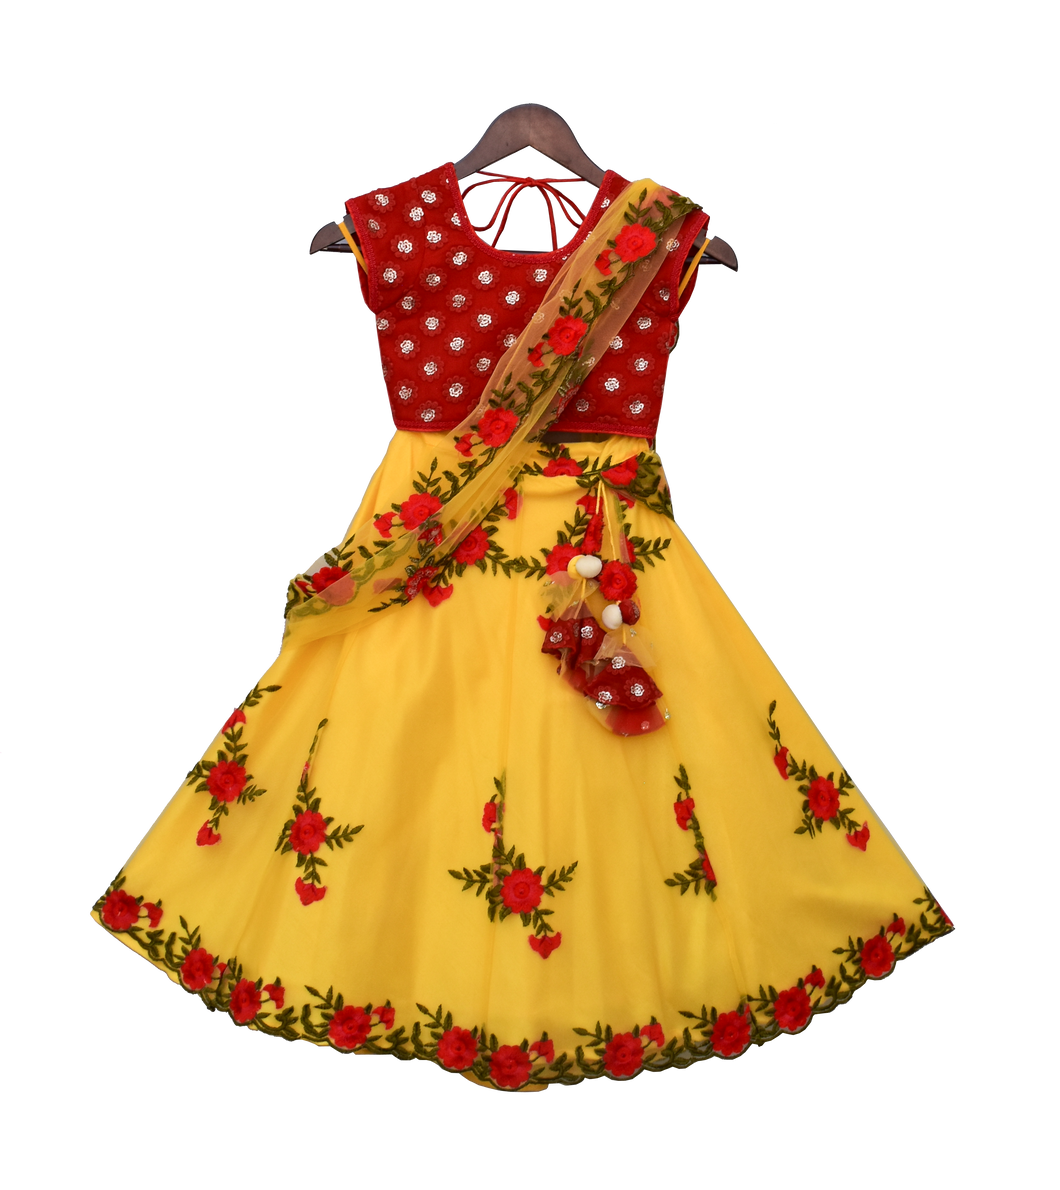 Girls Red Embroidery Choli With Yellow Embroidery Lehenga